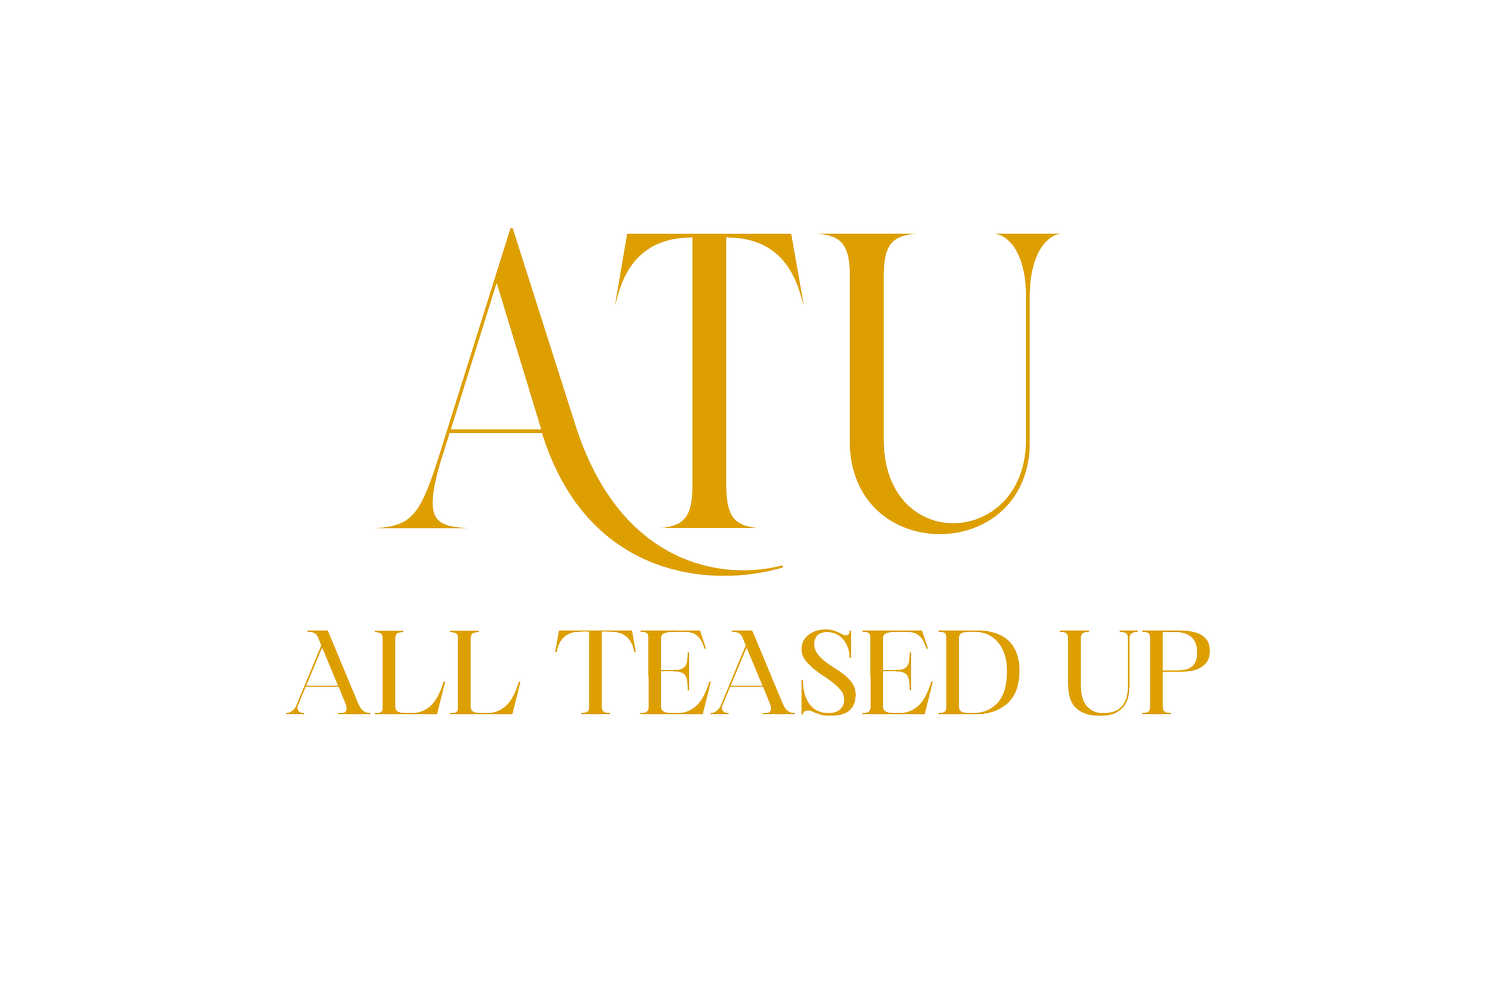 ALL TEASED UP